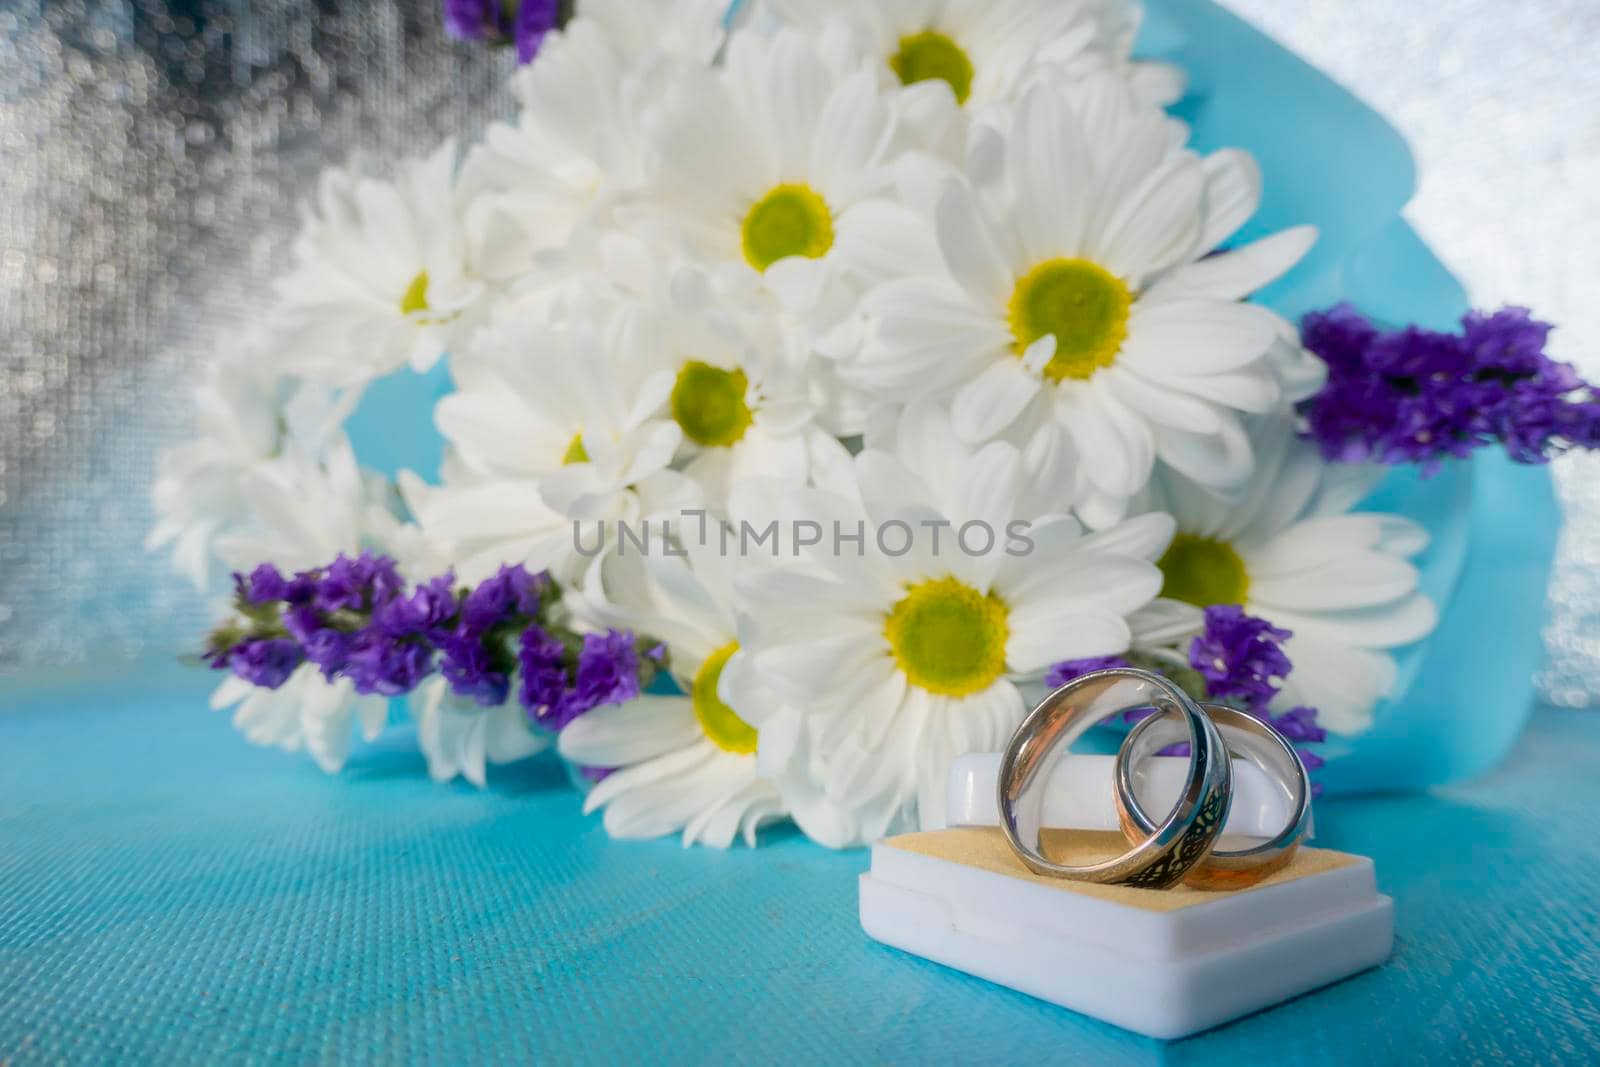 Wedding bouquet of bride. wedding card with original rings in a white box, a bouquet of white chrysanthemums or daisies and a white lace fan on a blue background